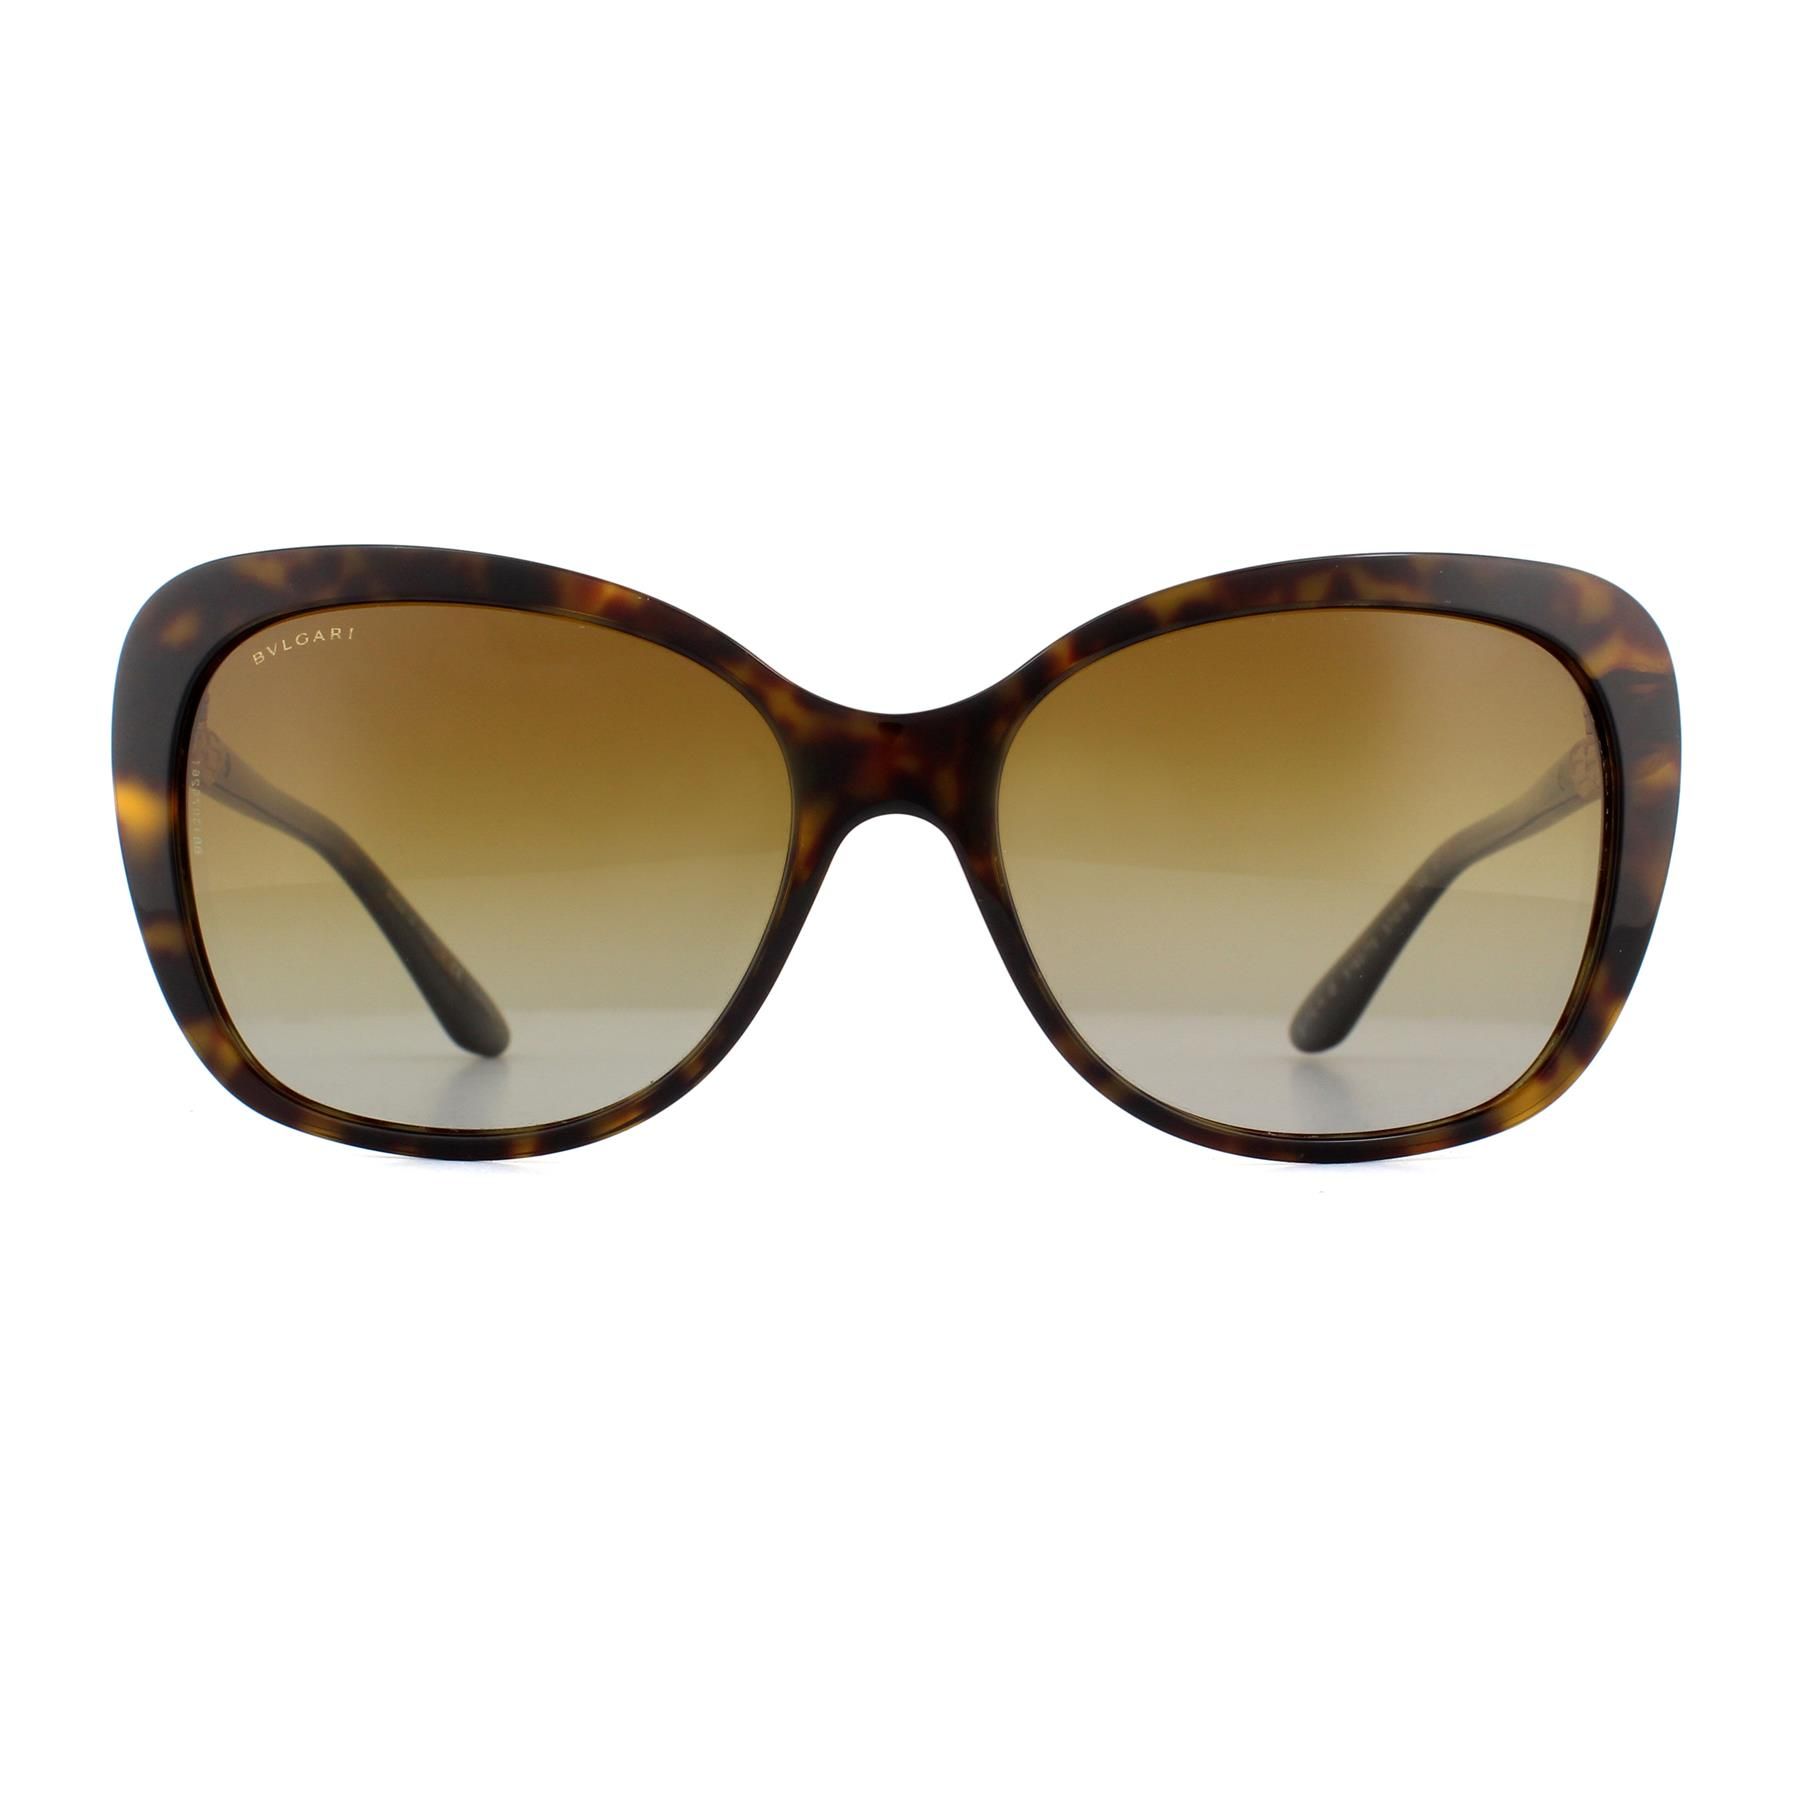 Bvlgari 8179kb 5193t5 sunglasses have a dark havana frame with a brown gradient polarized lens. They are made of plastic and have a square shape and are for women.